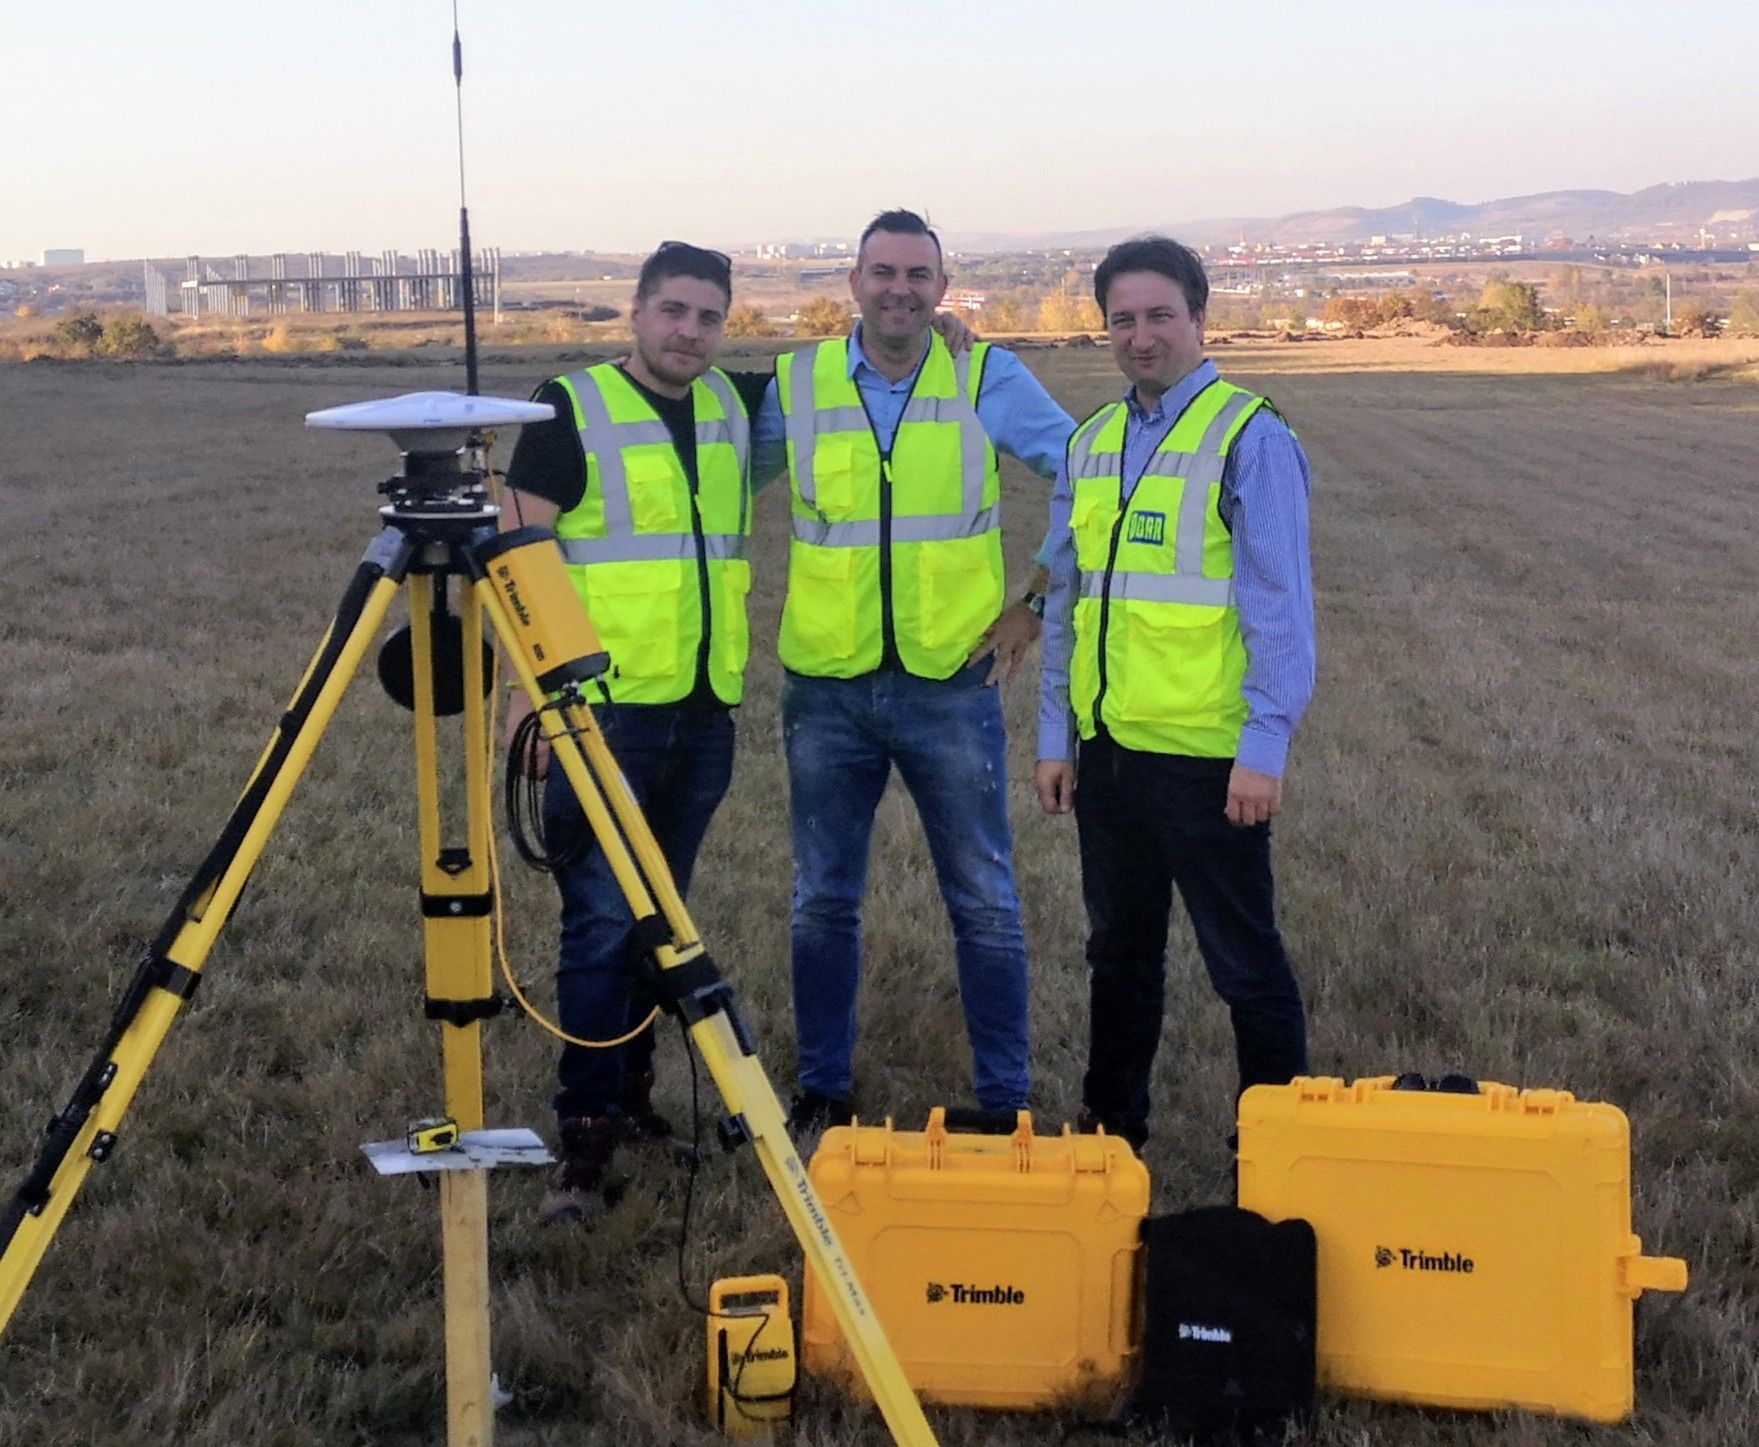 PORR Group, one of Europe's largest construction companies, is finding new ways of increasing productivity and efficiency in their projects. In Romania, PORR is running a research project to build their competence and pave the way for changing work processes and usage of BIM methodology. Trimble software and equipment is a large part of this, and in this article, Romania tells us about their experience of using Quadri as a common data environment for the project. 